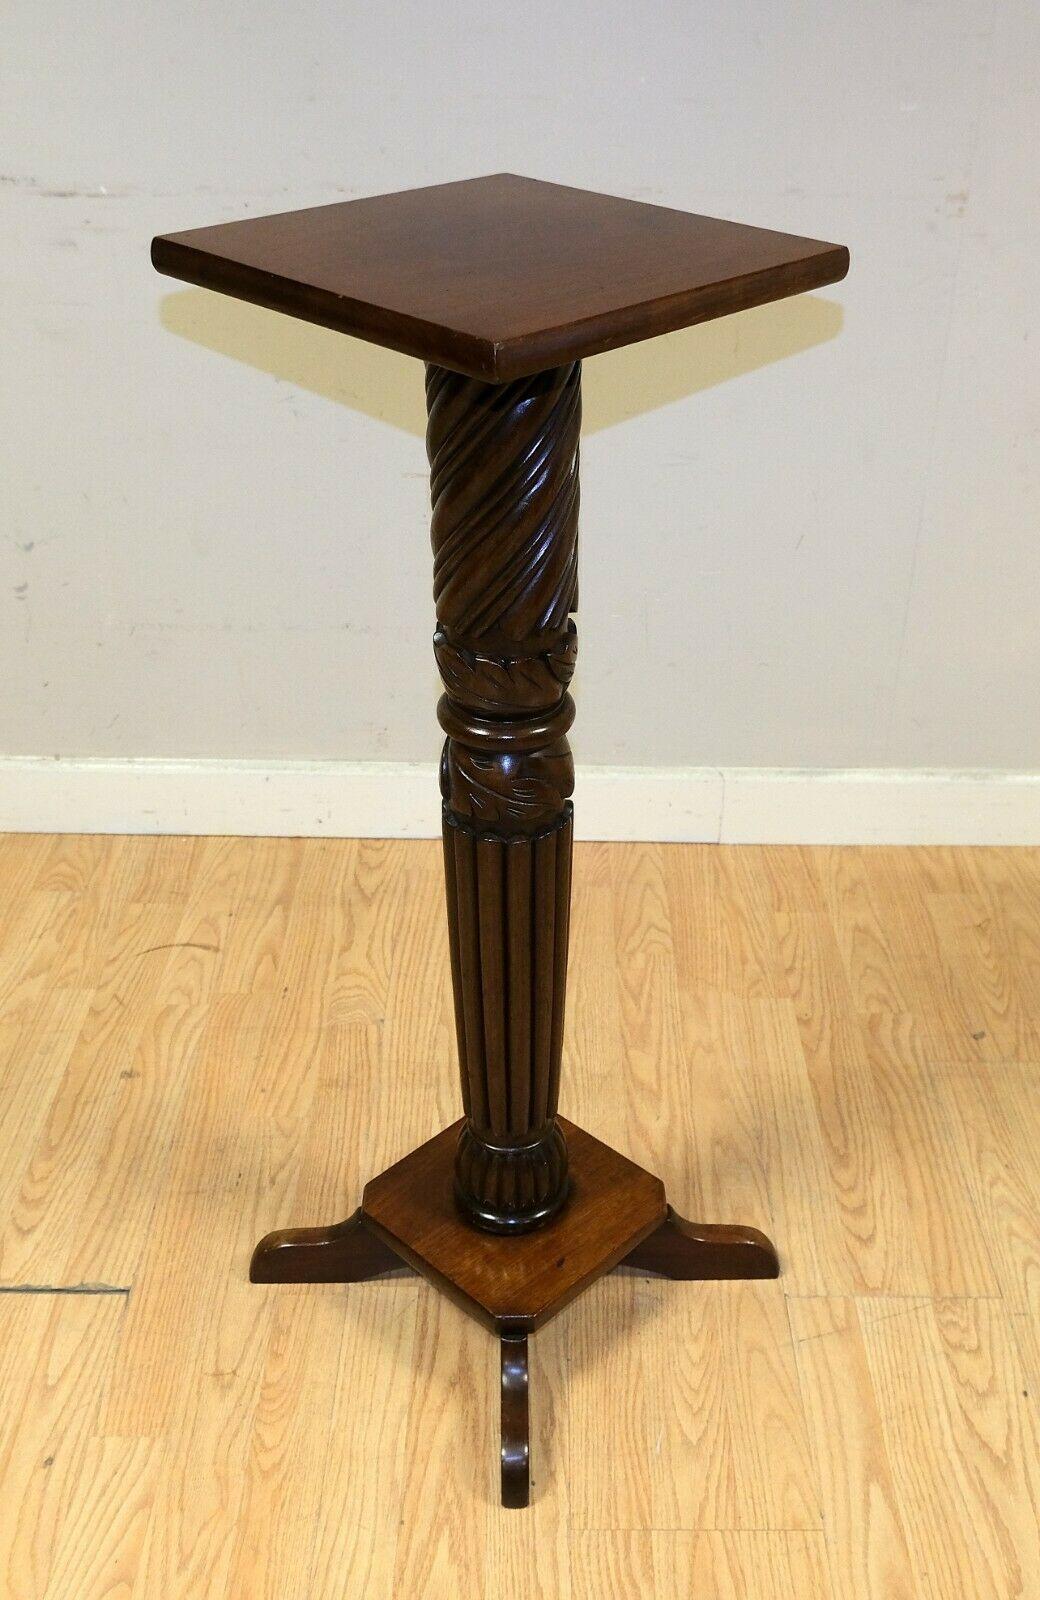 We are delighted to offer for sale this stunning Victorian Mahogany brown torchiere plant stand on square top and support.

The item is a stunning Trafalgar twist carved stem all in good quality. It adds character to any room and it doesn't take